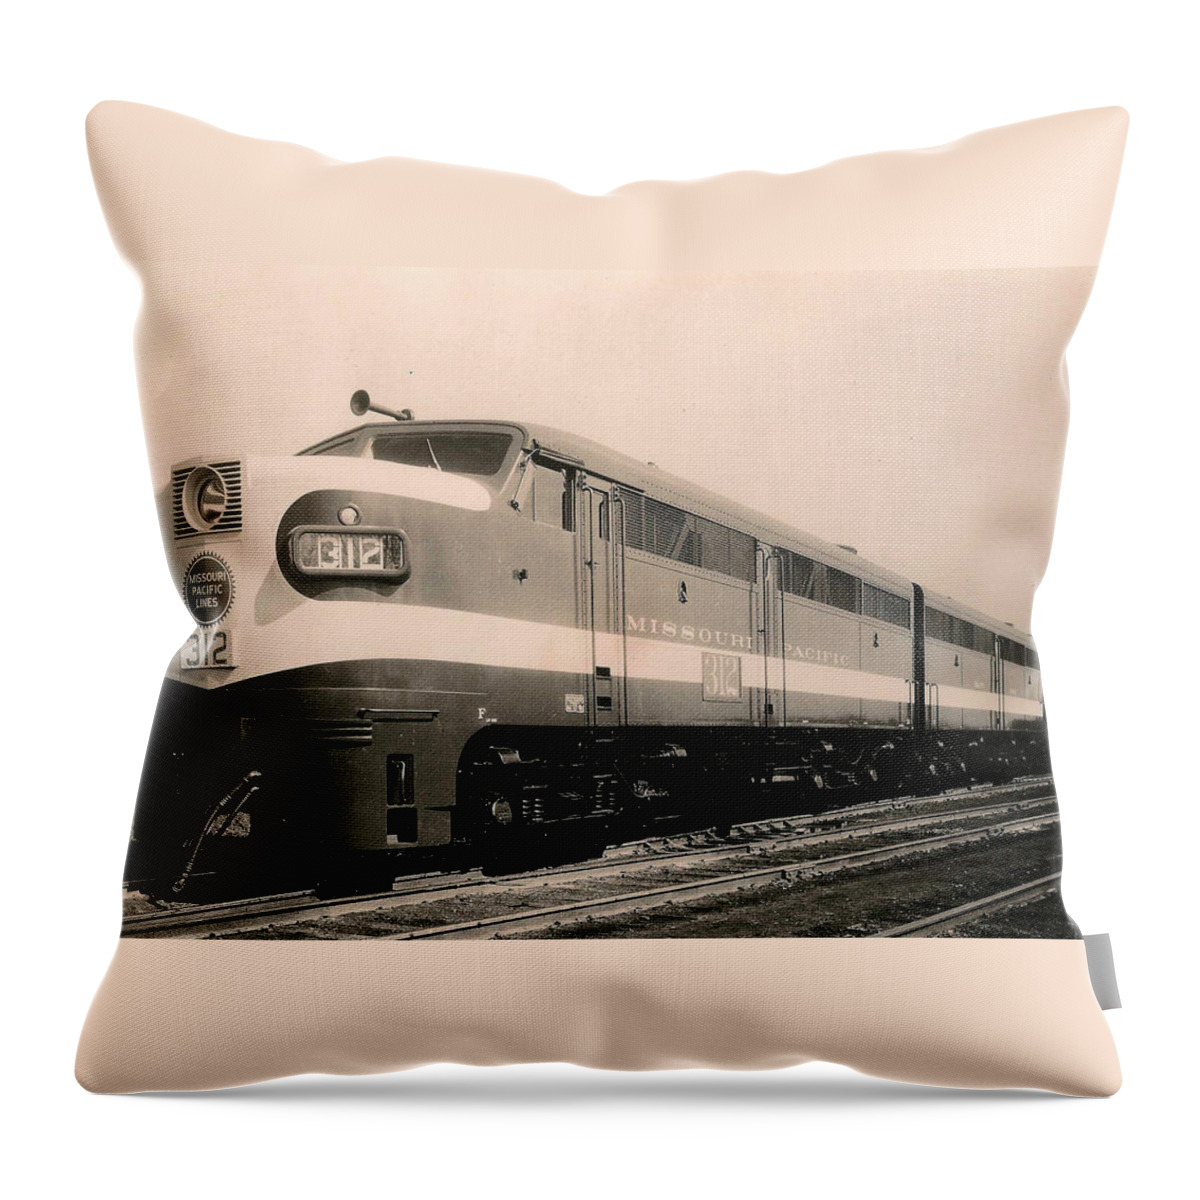 Train Throw Pillow featuring the photograph Alcoa Ge Freight Locomotive by Lawrence Christopher